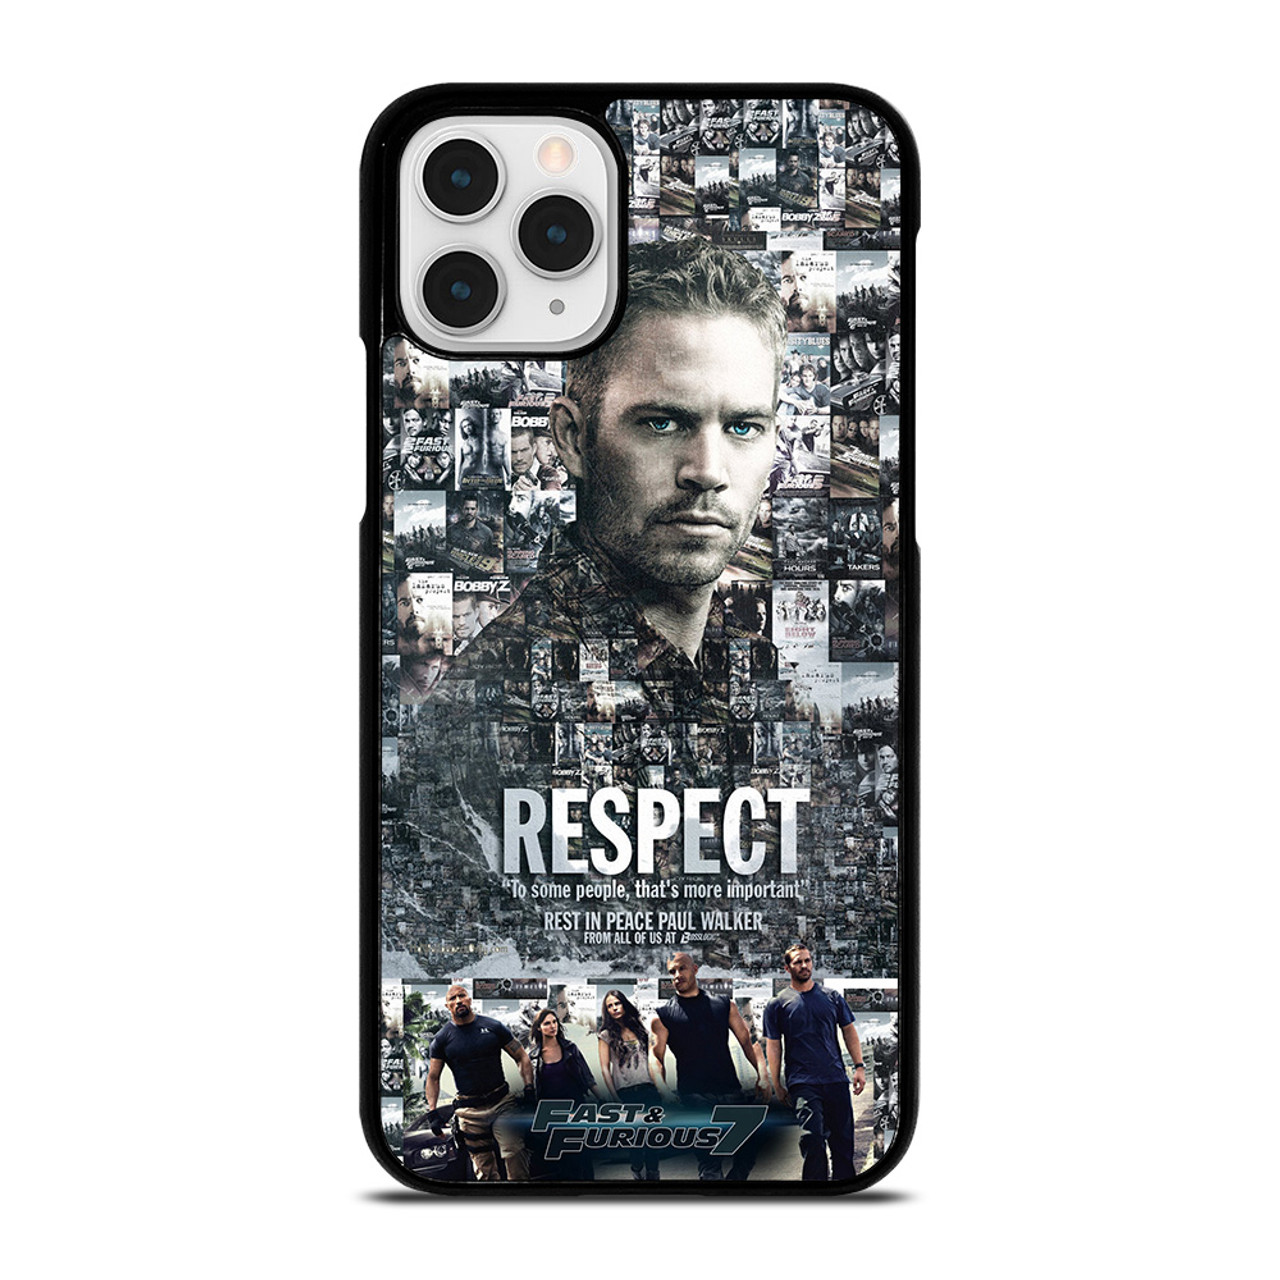 FAST FURIOUS 7 PAUL WALKER iPhone 11 Pro Case Cover